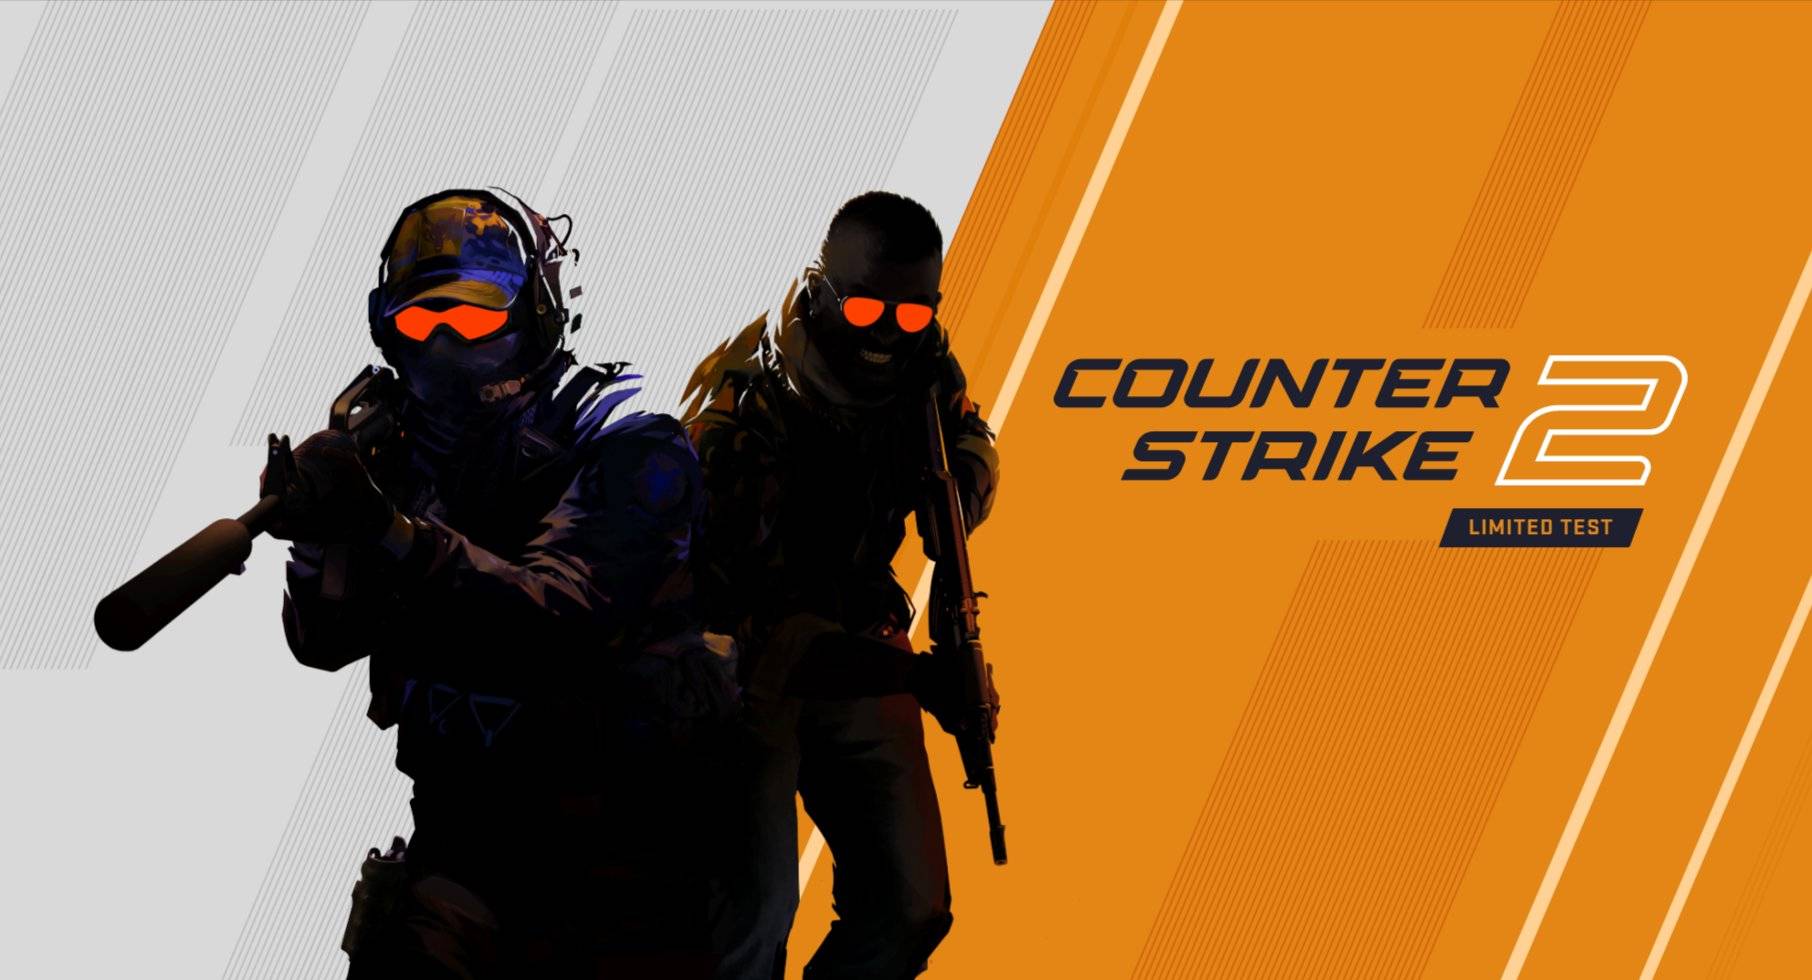 Counter-Strike 2 Limited Test: How To Enter, Dates and More